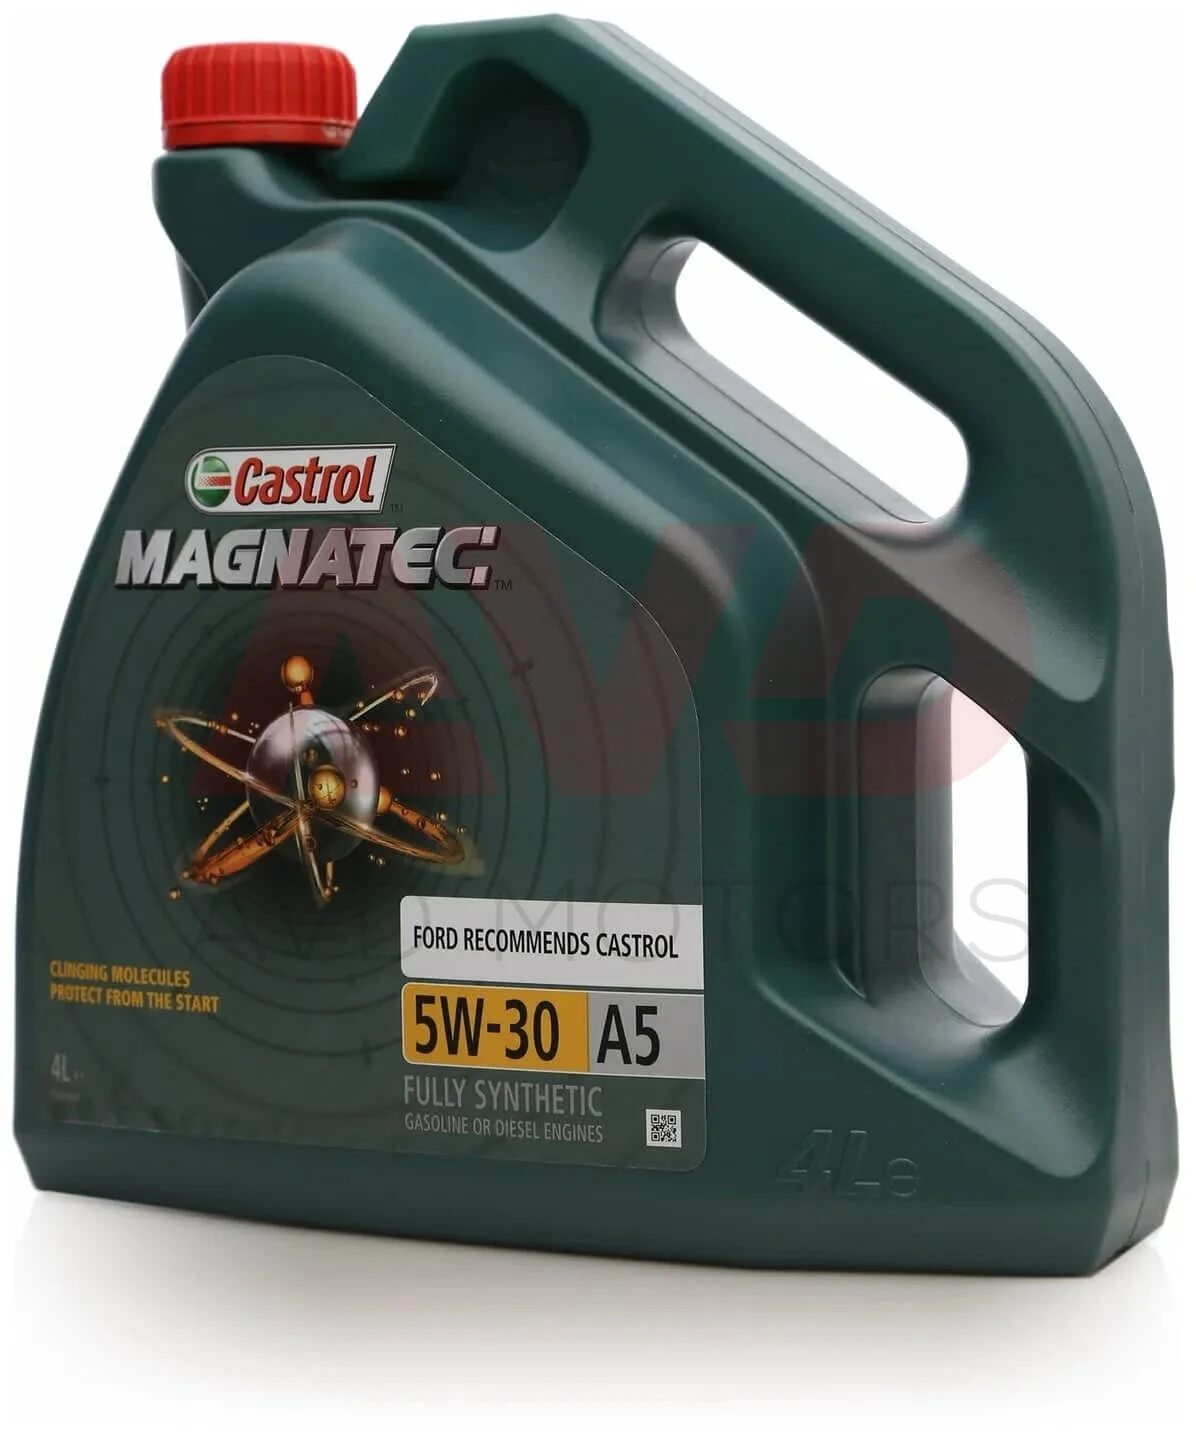 Castrol Magnatec 5w-30 AP 4 Л. Magnatec AP 5w30 (5 л). Castrol Magnatec AP 5w-30, 1л. Castrol 5w30 Magnatec 4л Ford. Масло castrol magnatec 5w 30